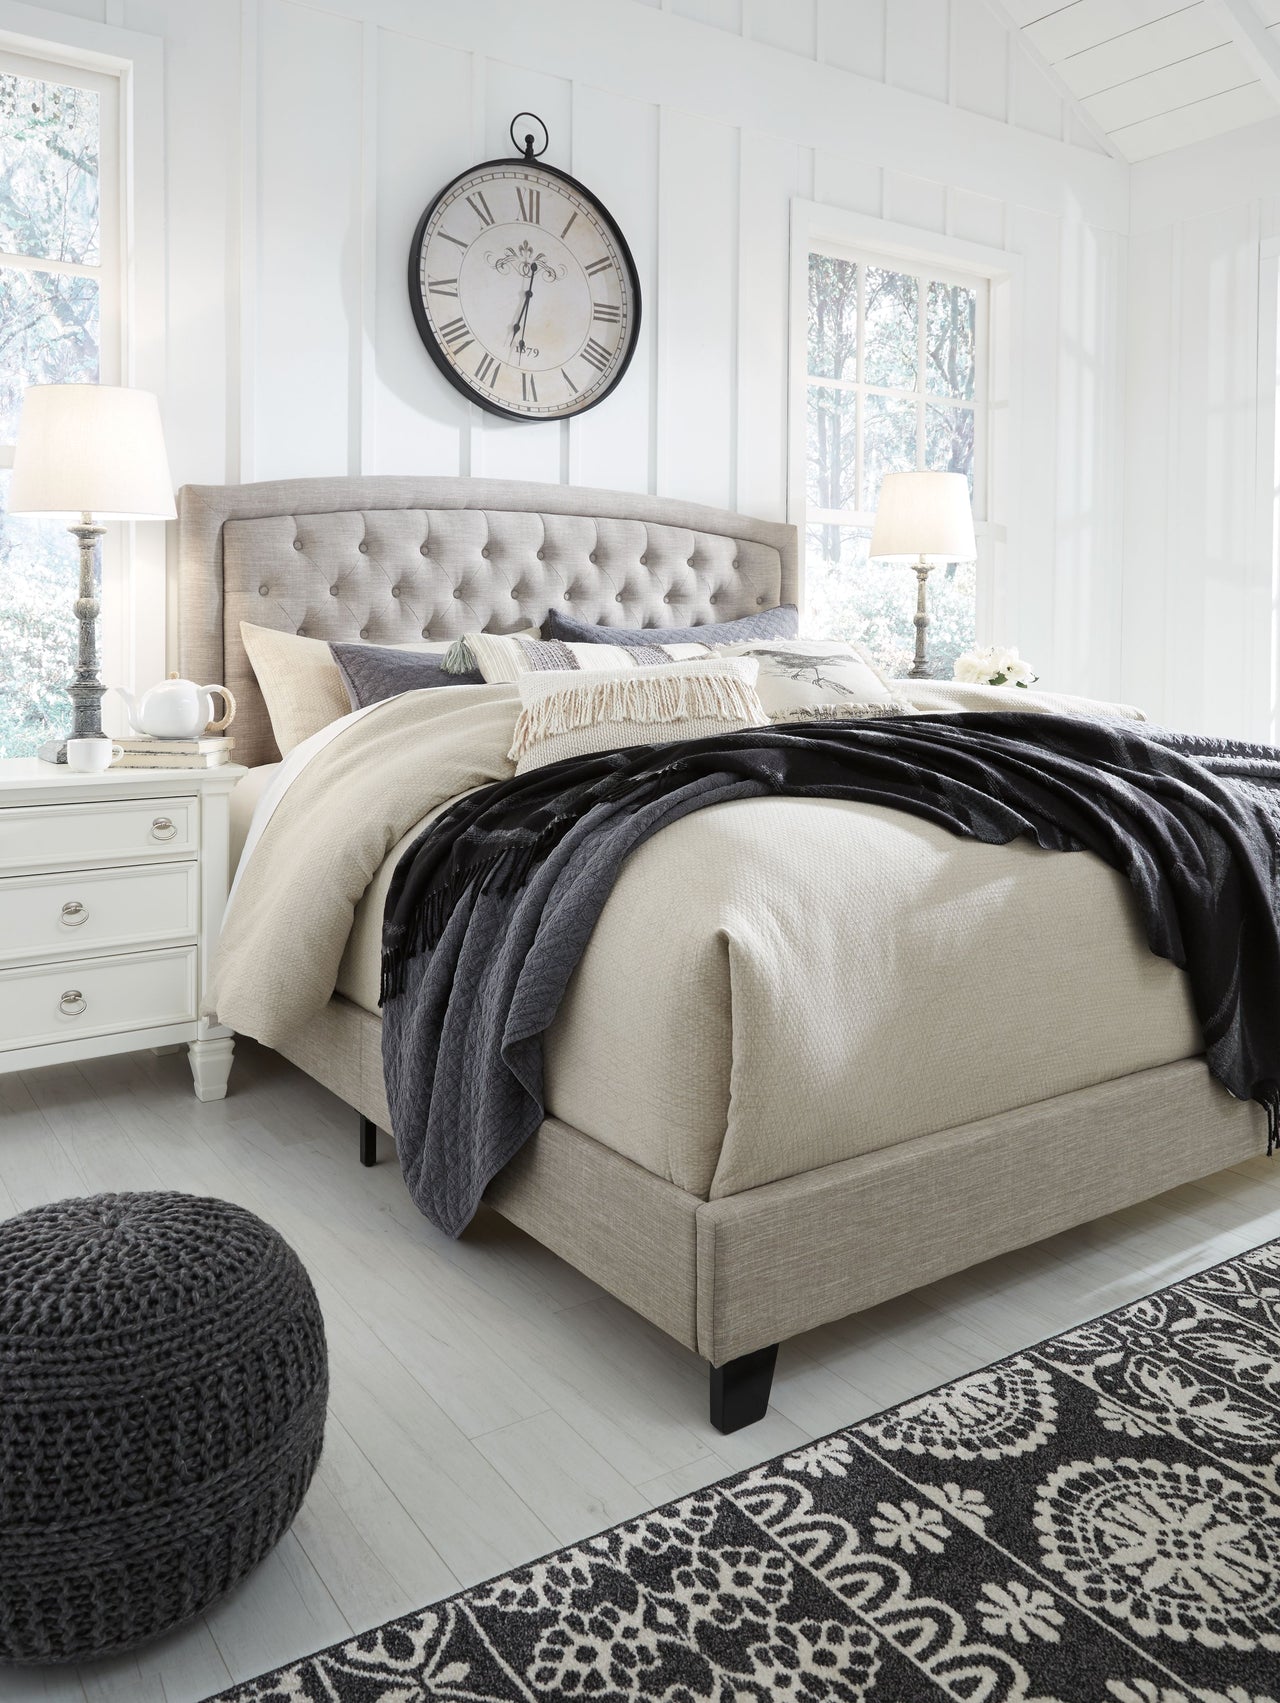 Jerary - Arched Upholstered Bed - Tony's Home Furnishings